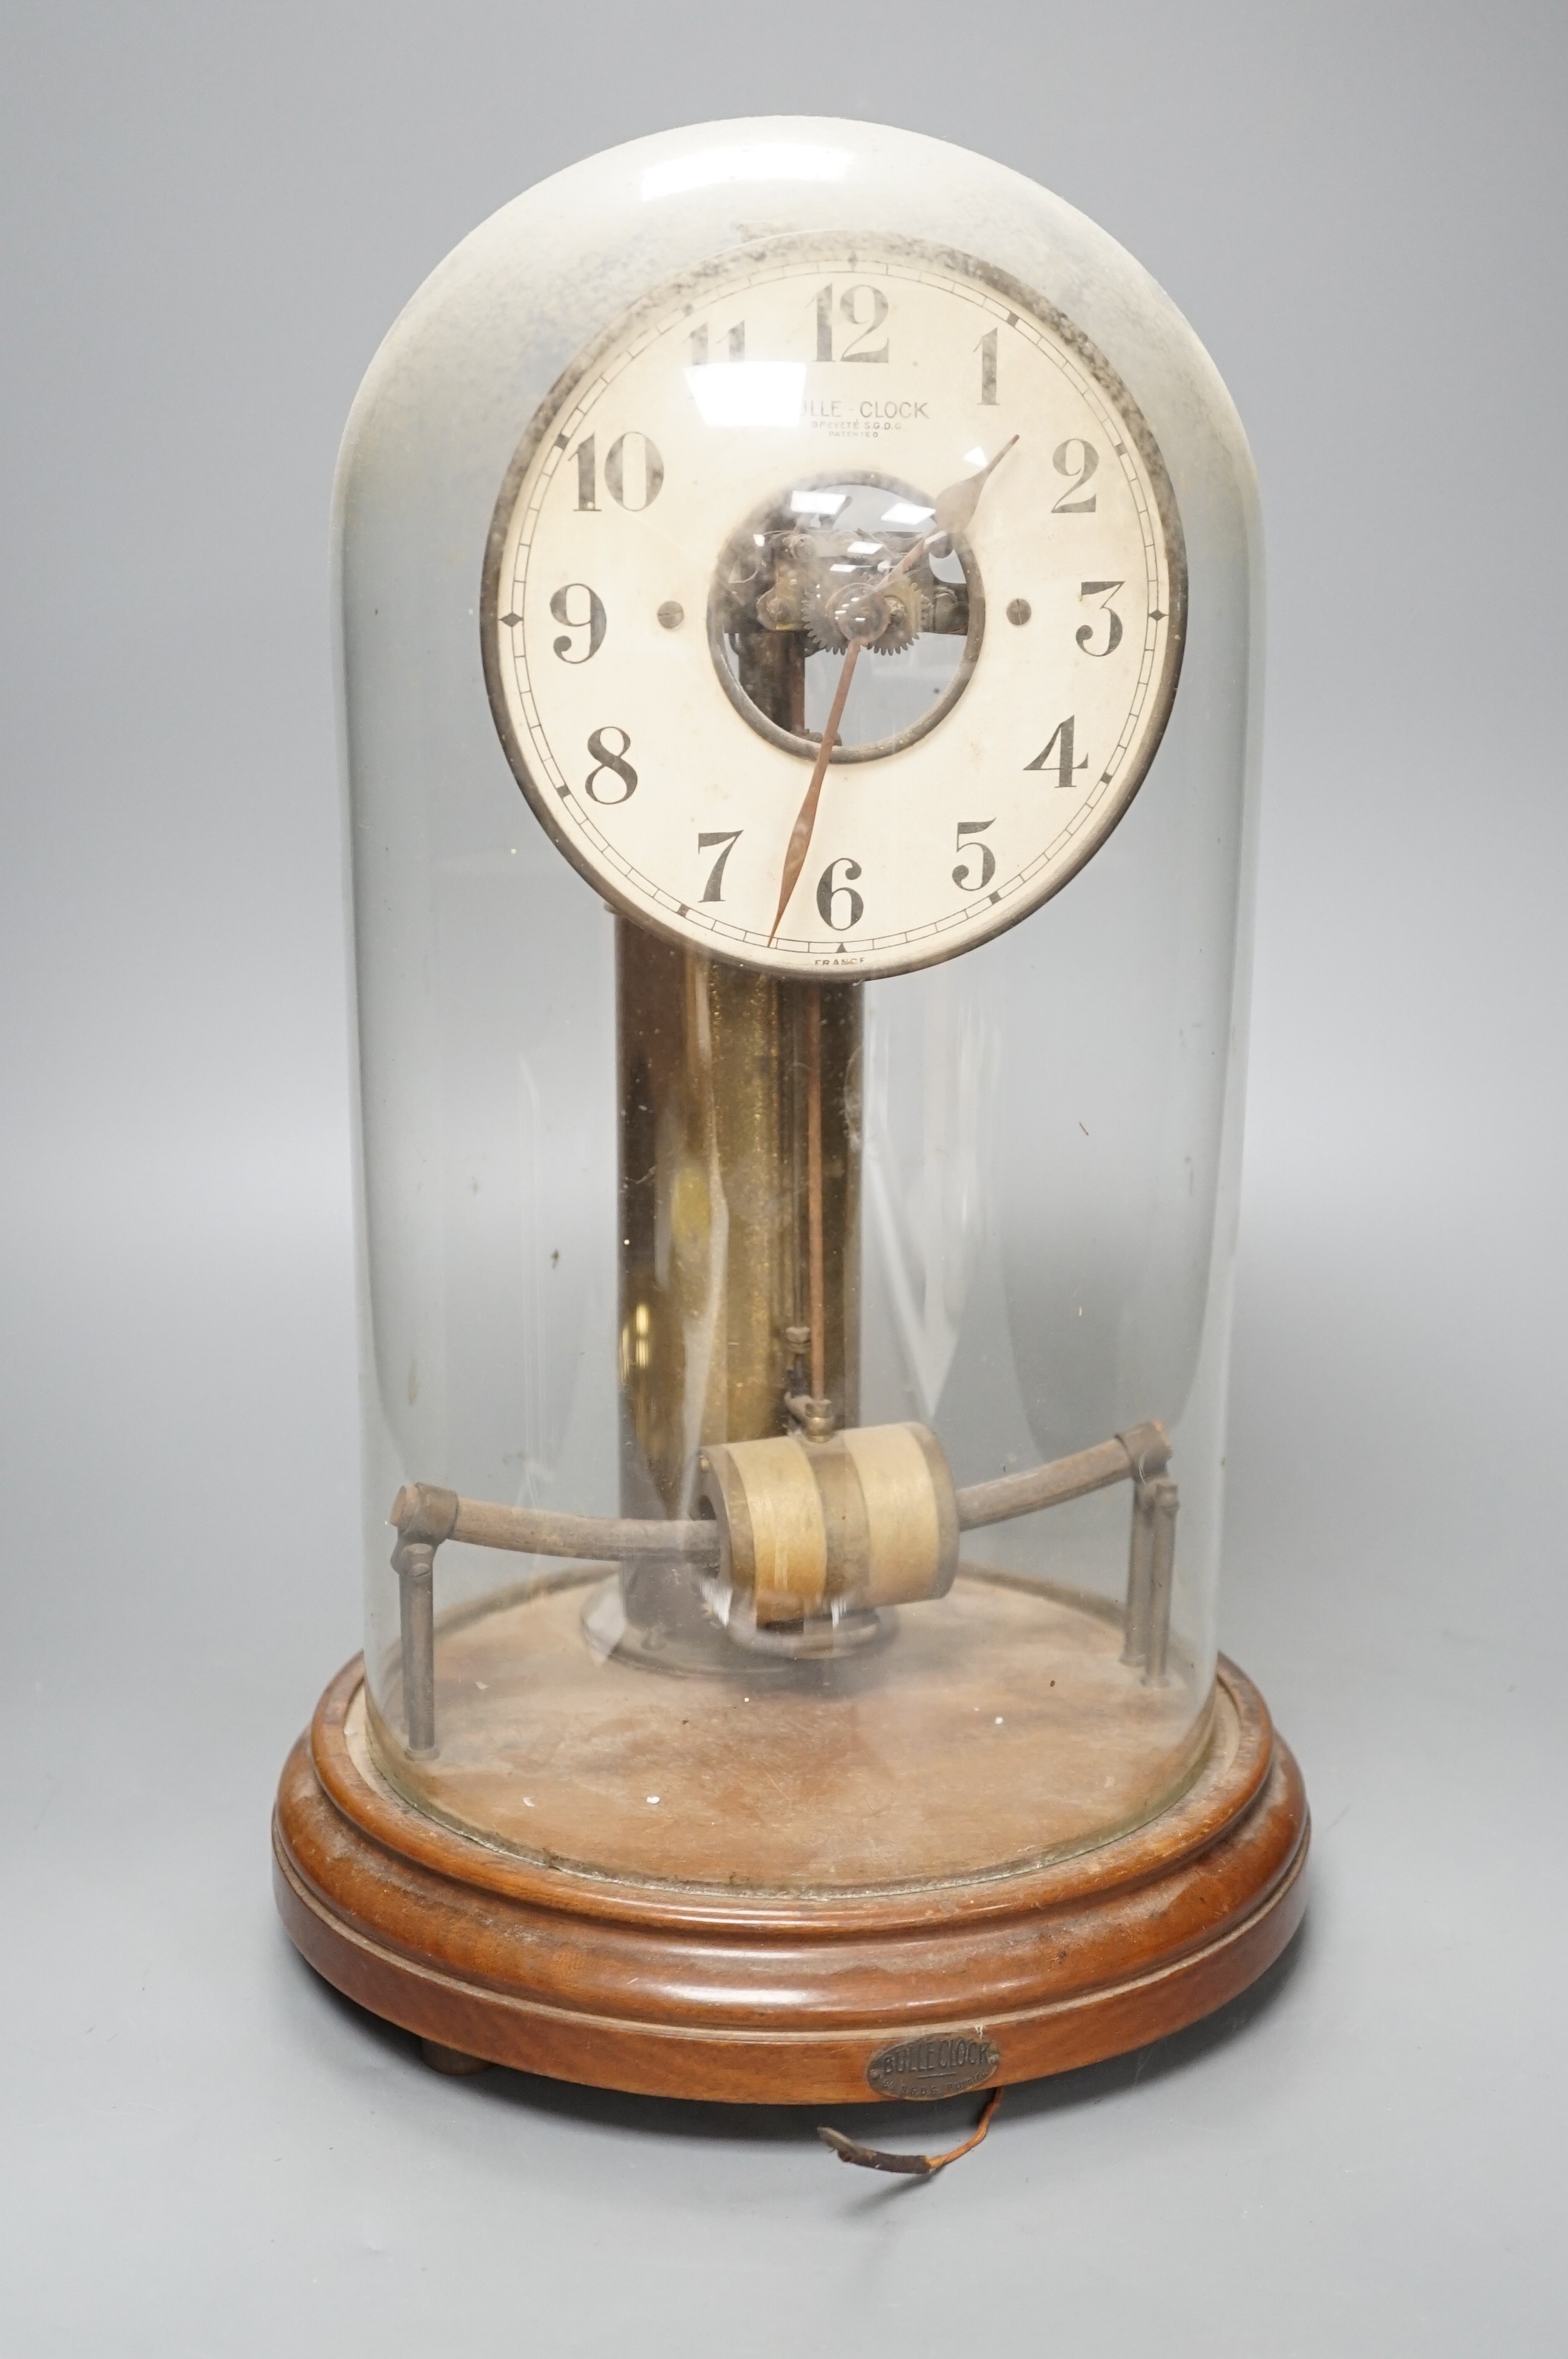 A Bulle electric pendulum clock, with large central brass pillar supporting the 14cm. dial, under a glass dome on a mahogany plinth